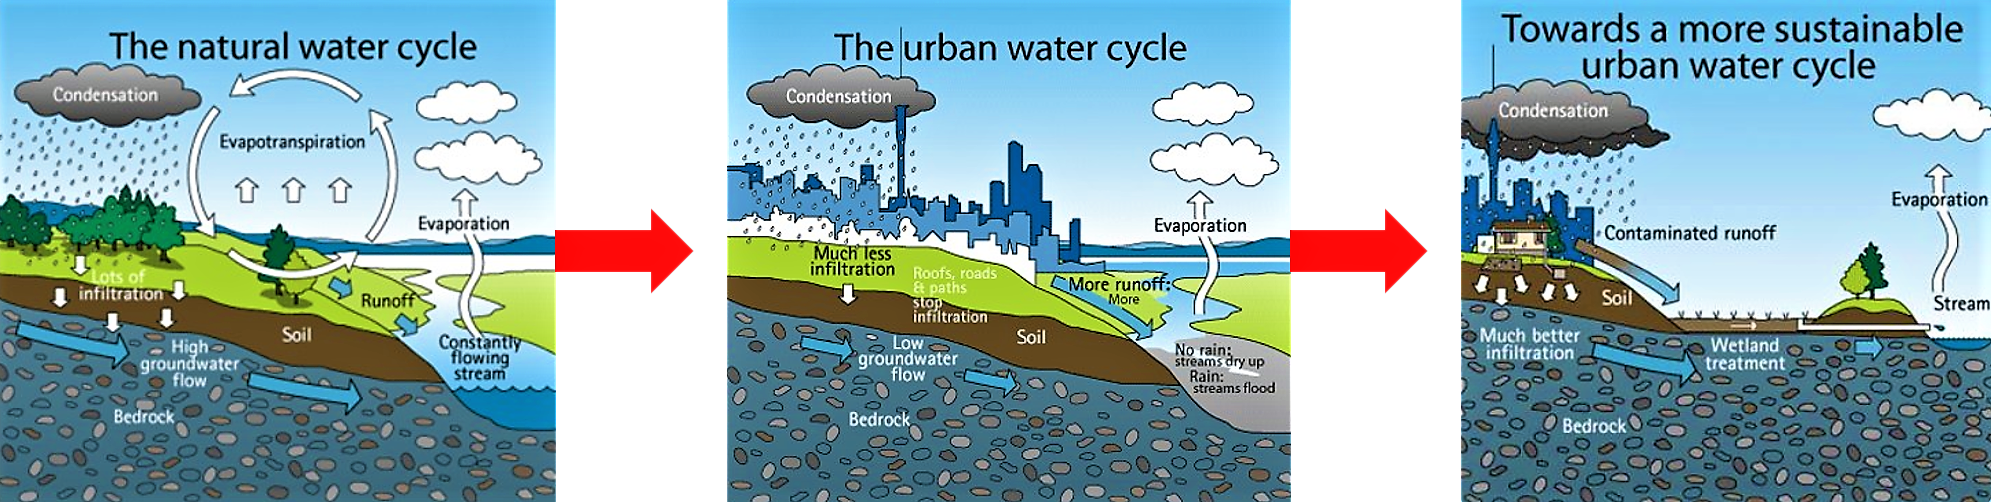 From left to right: a natural water cycle allows infiltration, groundwater flow and evapotranspiration. When urban areas seal surfaces and avoid groundwater recharge or infiltration, floods occur. Modern techniques use natural processes (e.g. infiltration ponds or wetlands) to manage runoff water. Source: AUCKLAND CITY COUNCIL (2010) 